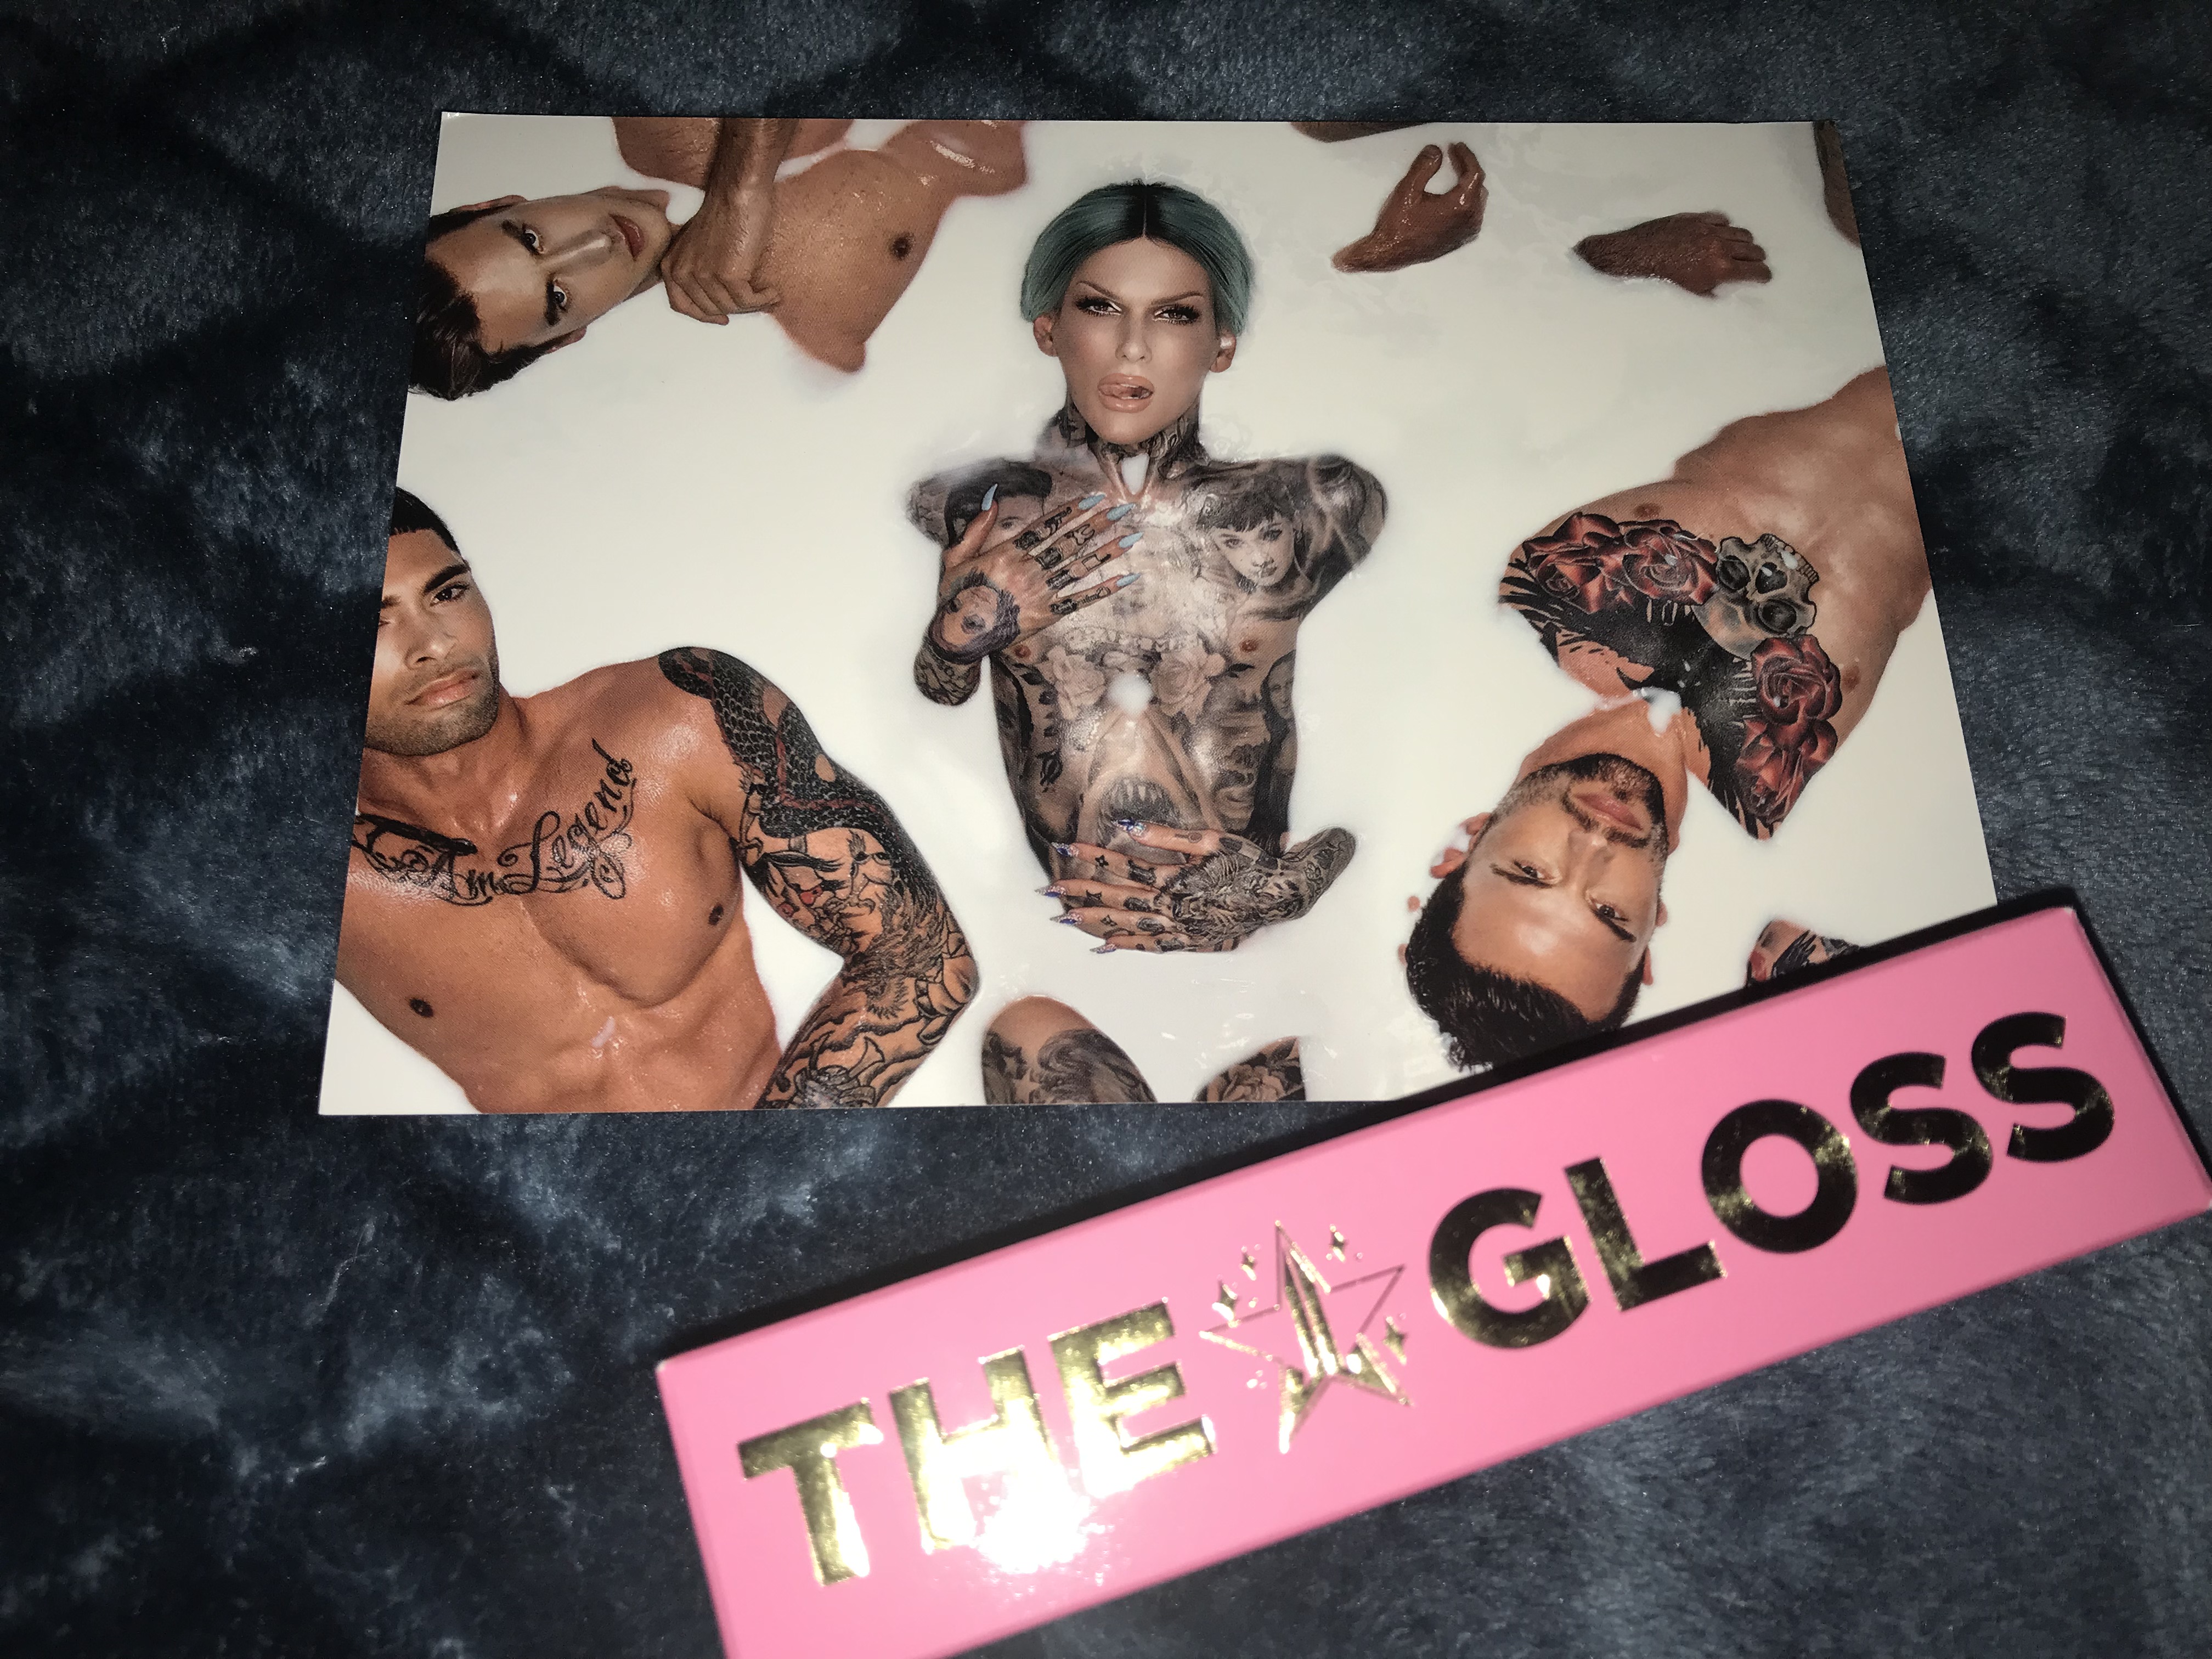 Jeffree Star The Gloss Her Glossiness